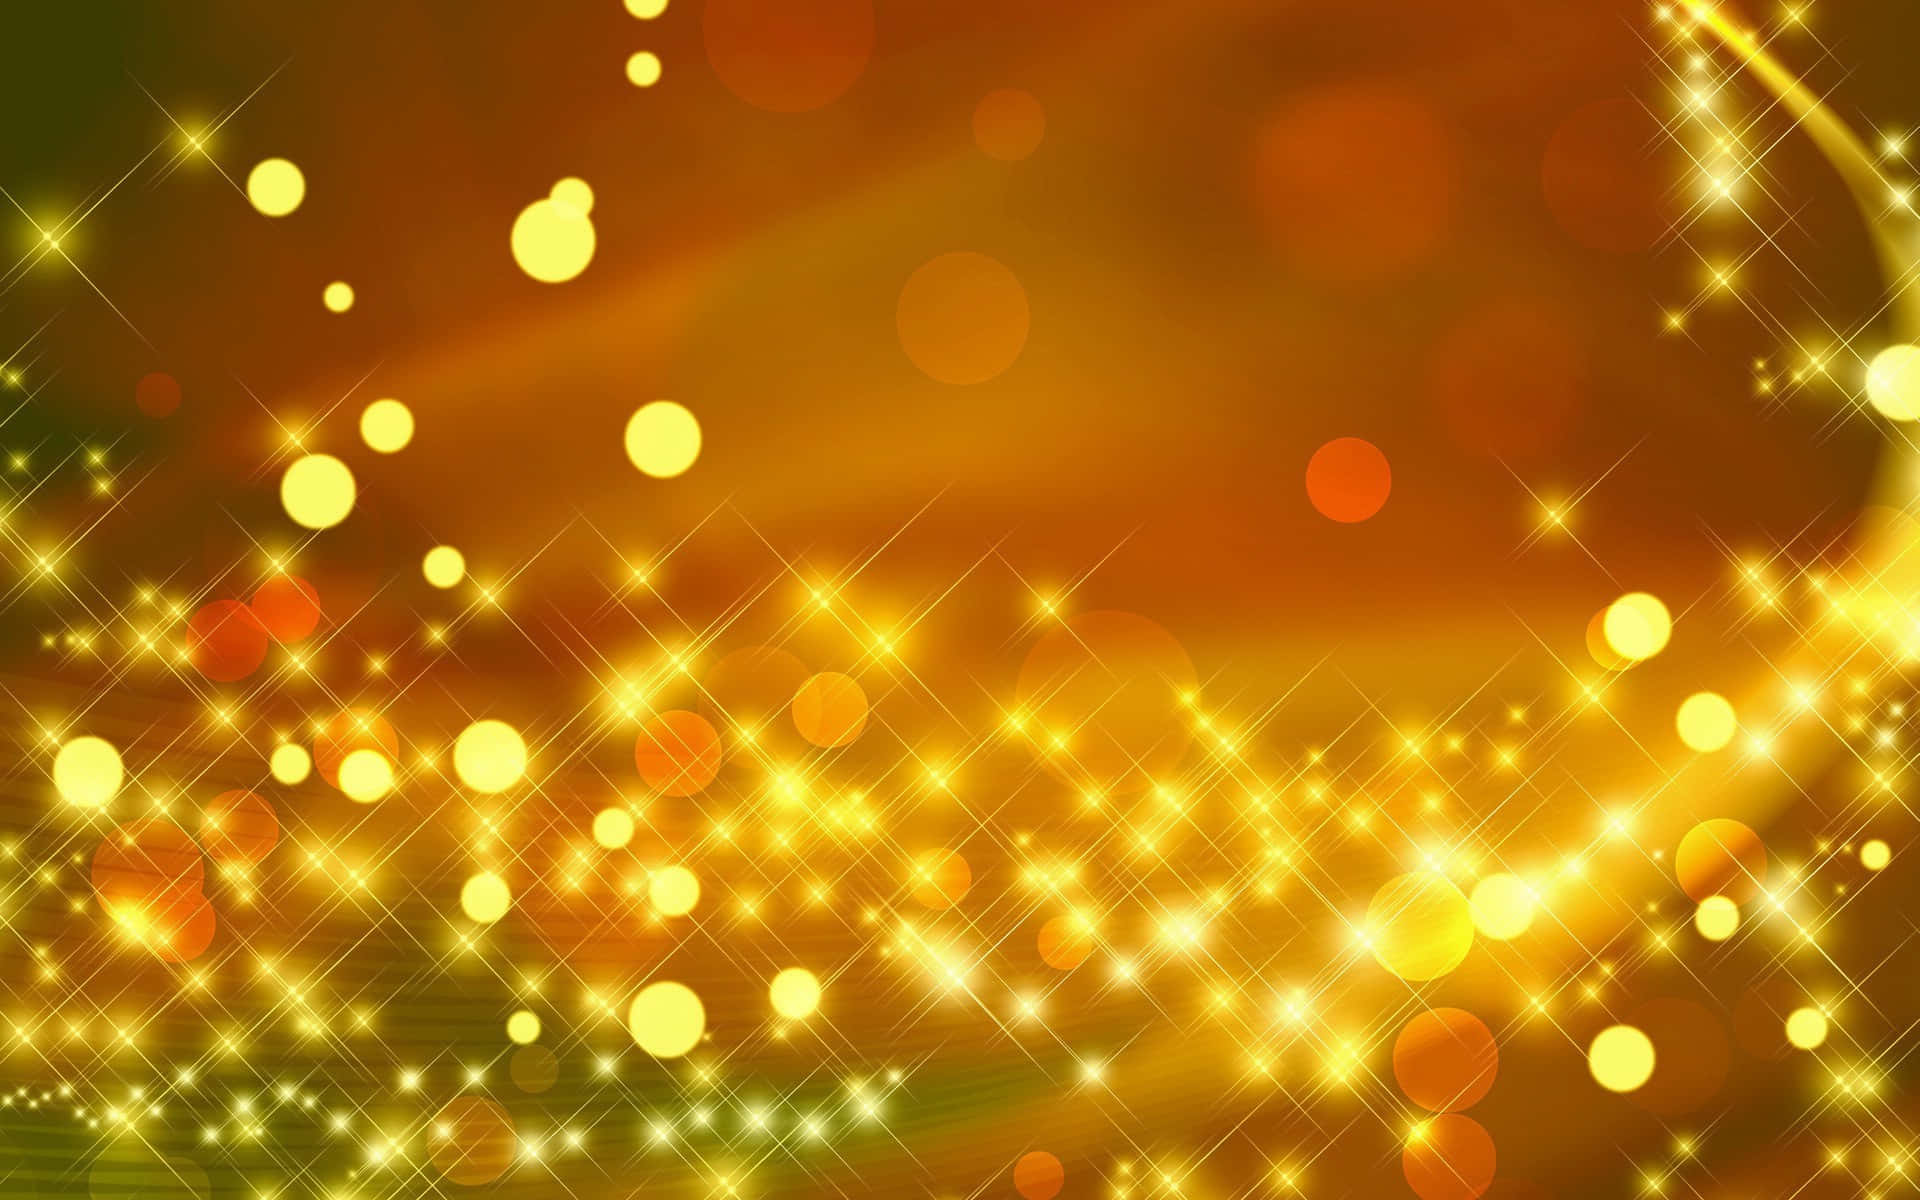 "Dare to Shine Brightly with Yellow Glitter" Wallpaper